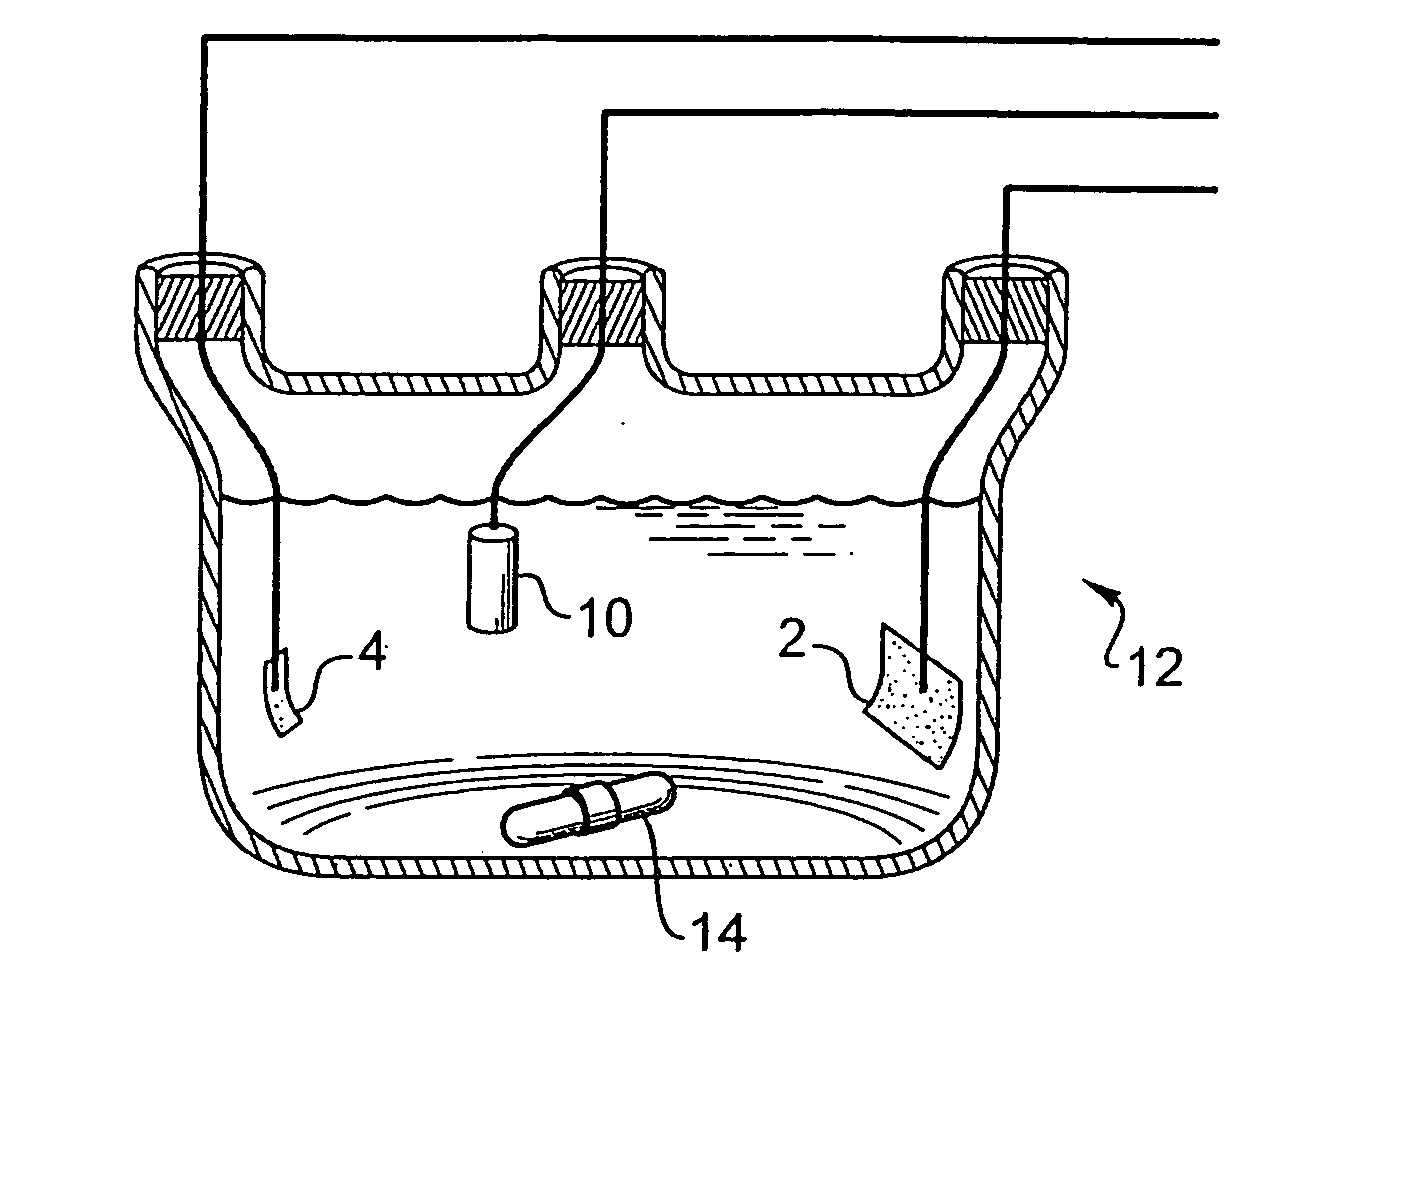 Platinum electrode surface coating and method for manufacturing the same